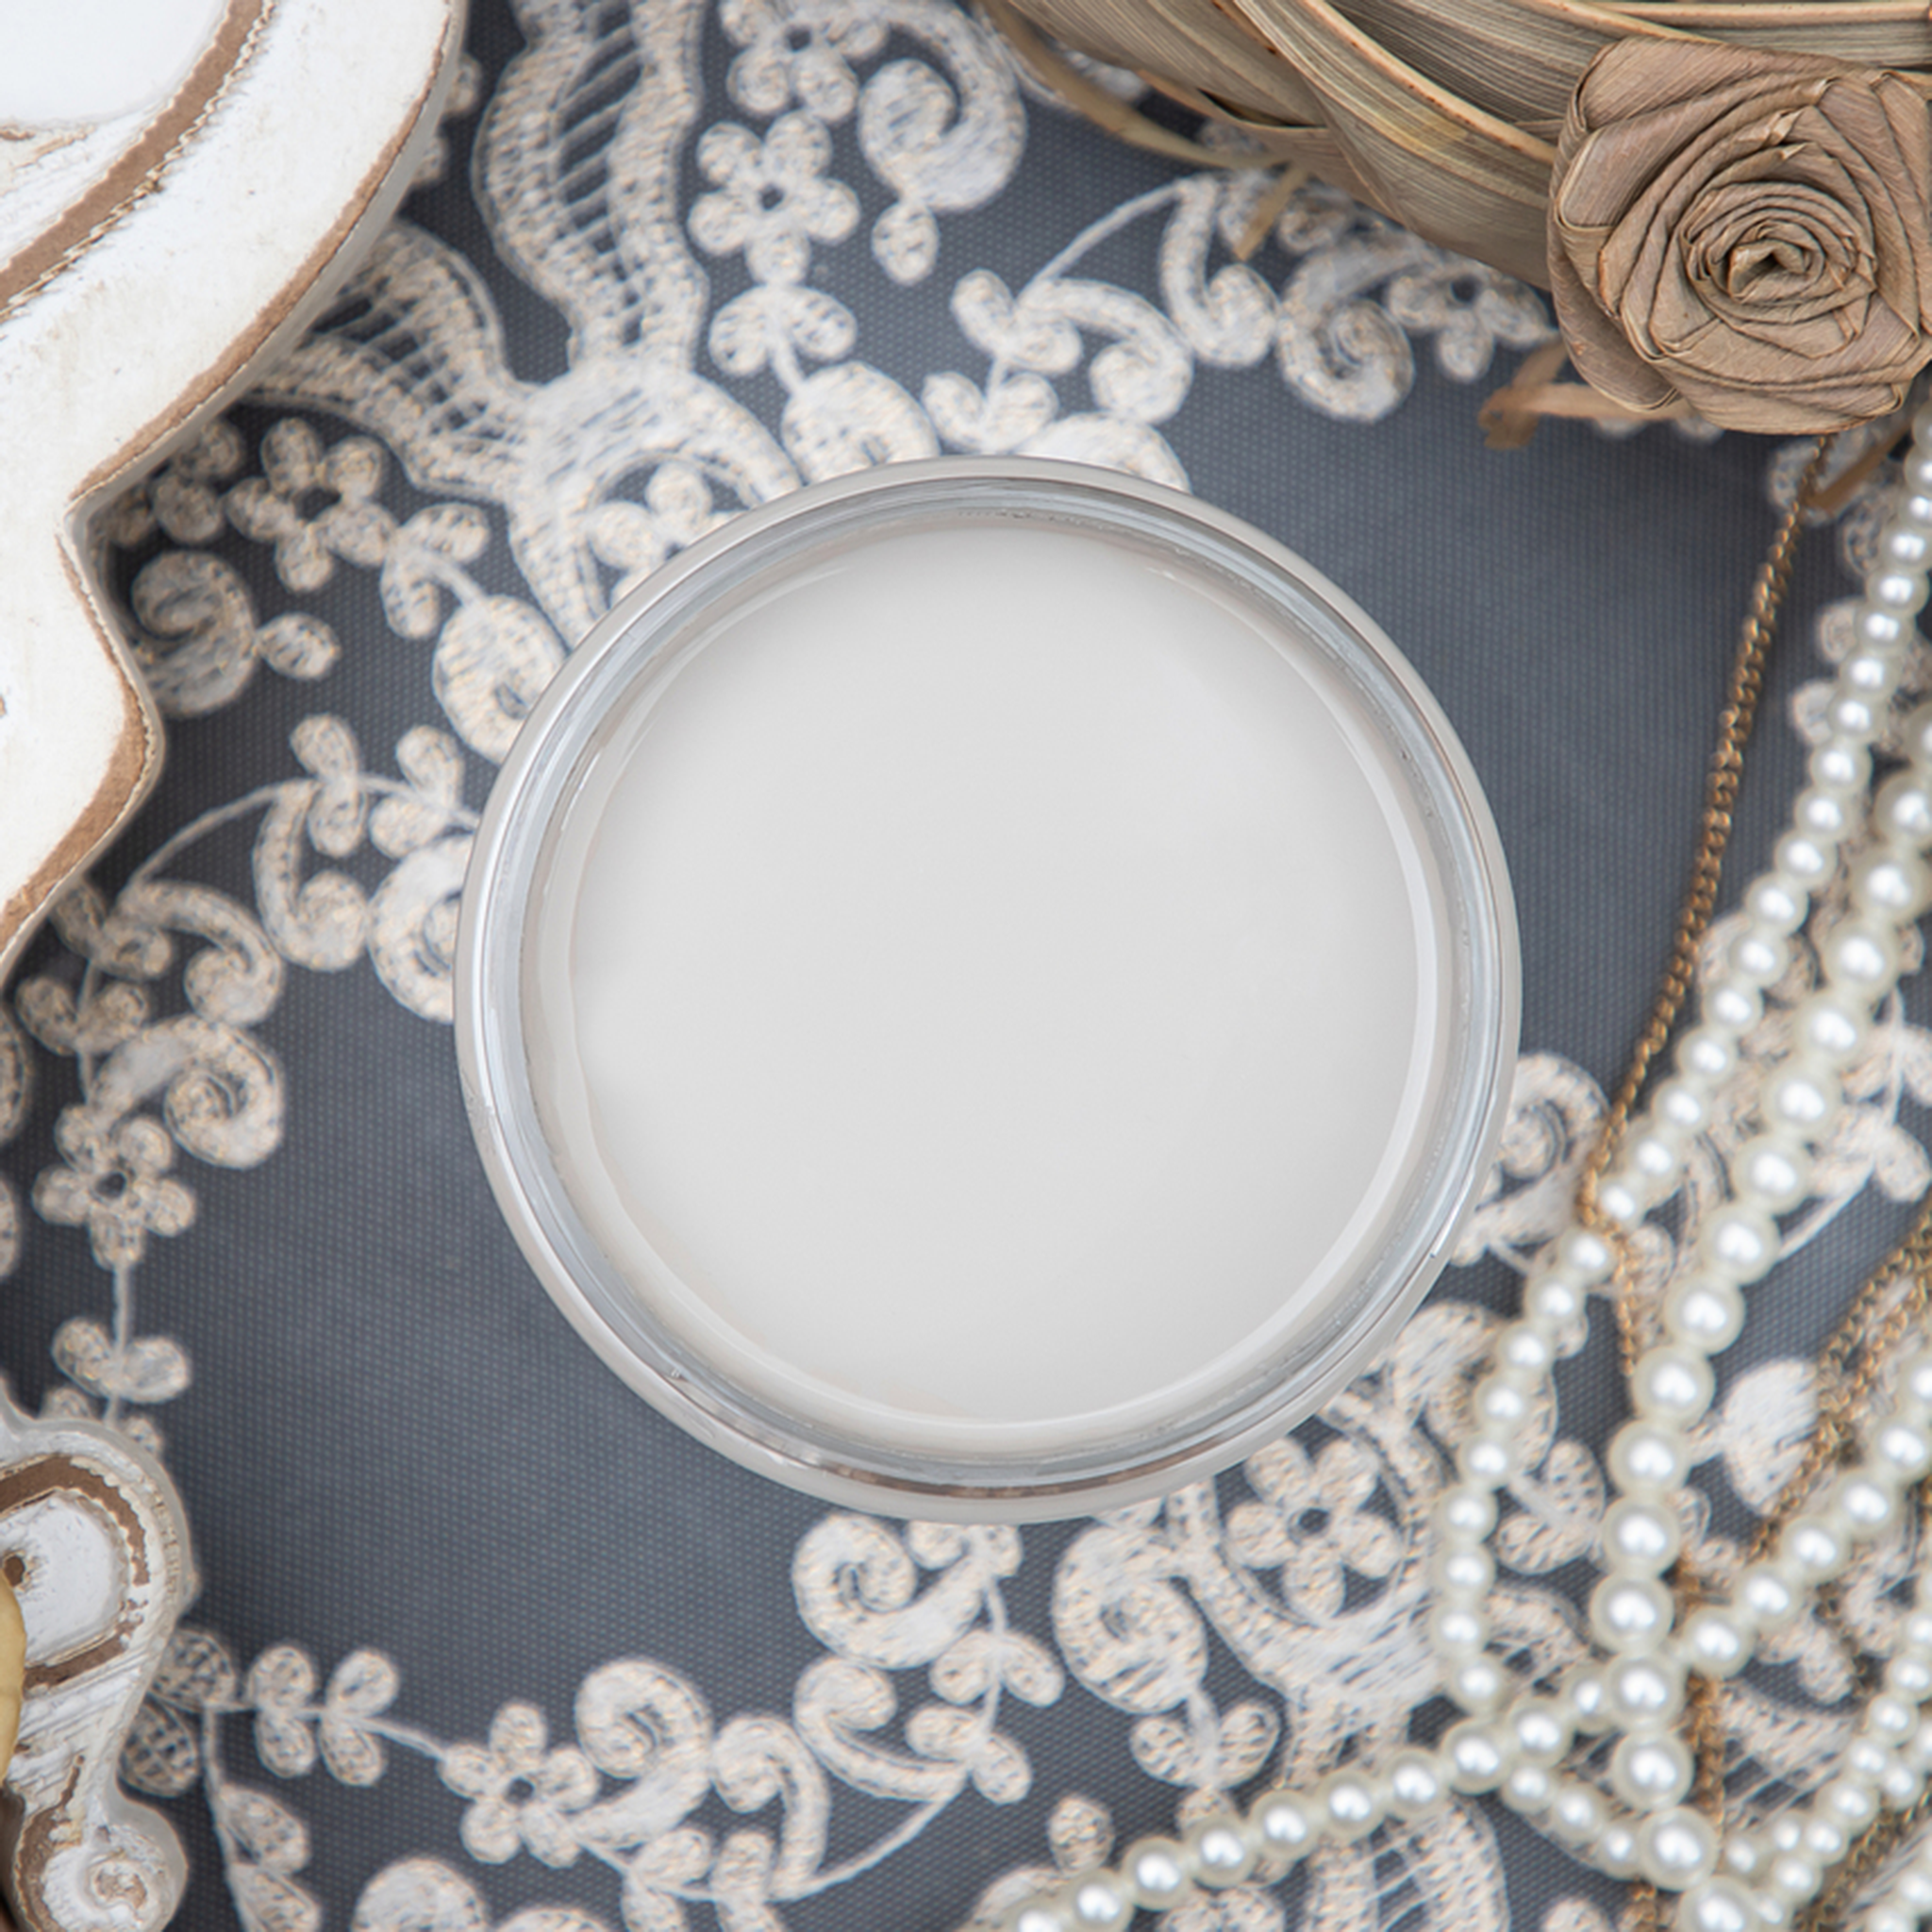 An arial view of an open container of Dixie Belle Paint Company’s French Linen Chalk Mineral Paint sits on a lace background with a pearl necklace.